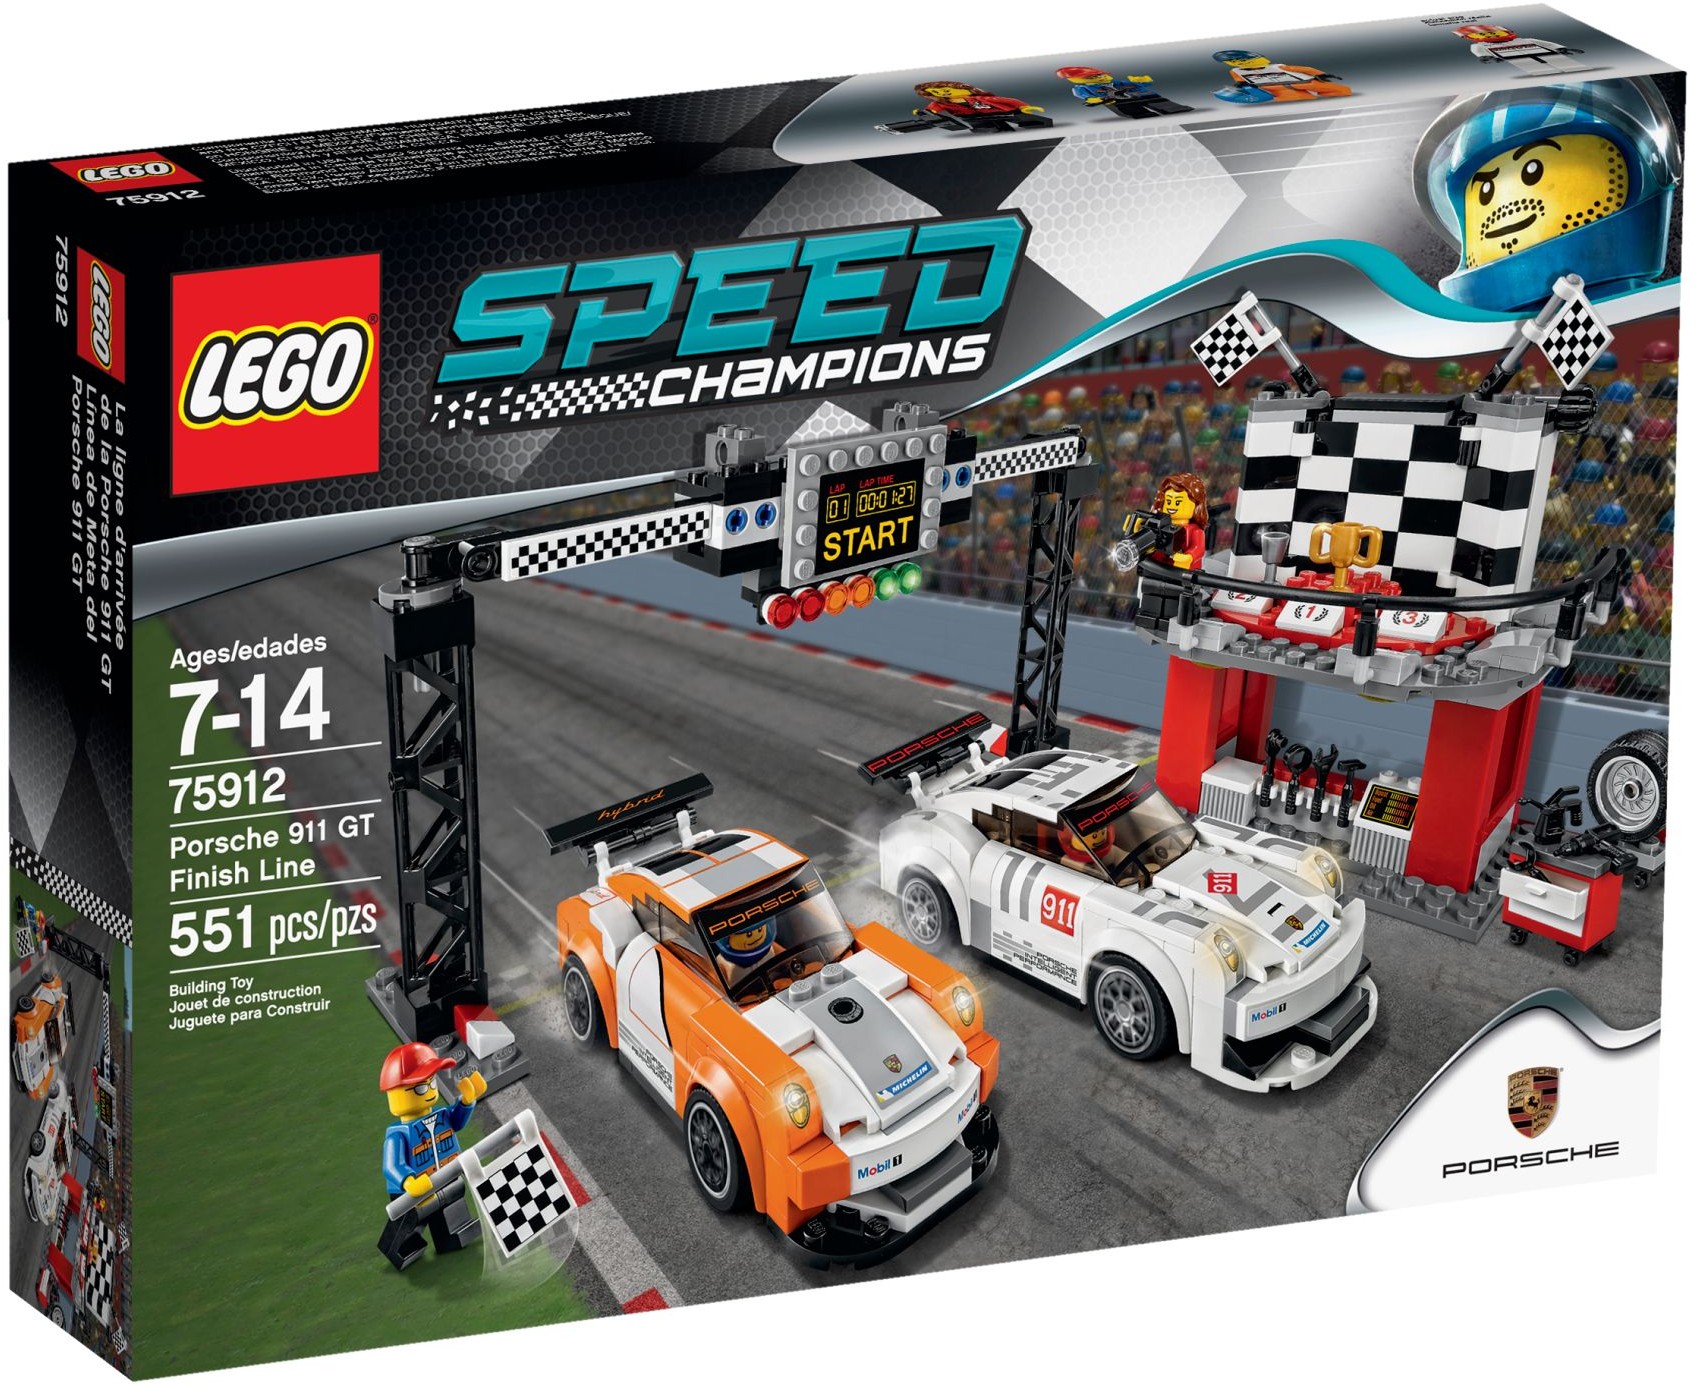 LEGO LEGO speed champion Porsche 911 GT finish line 75912 used From japan 